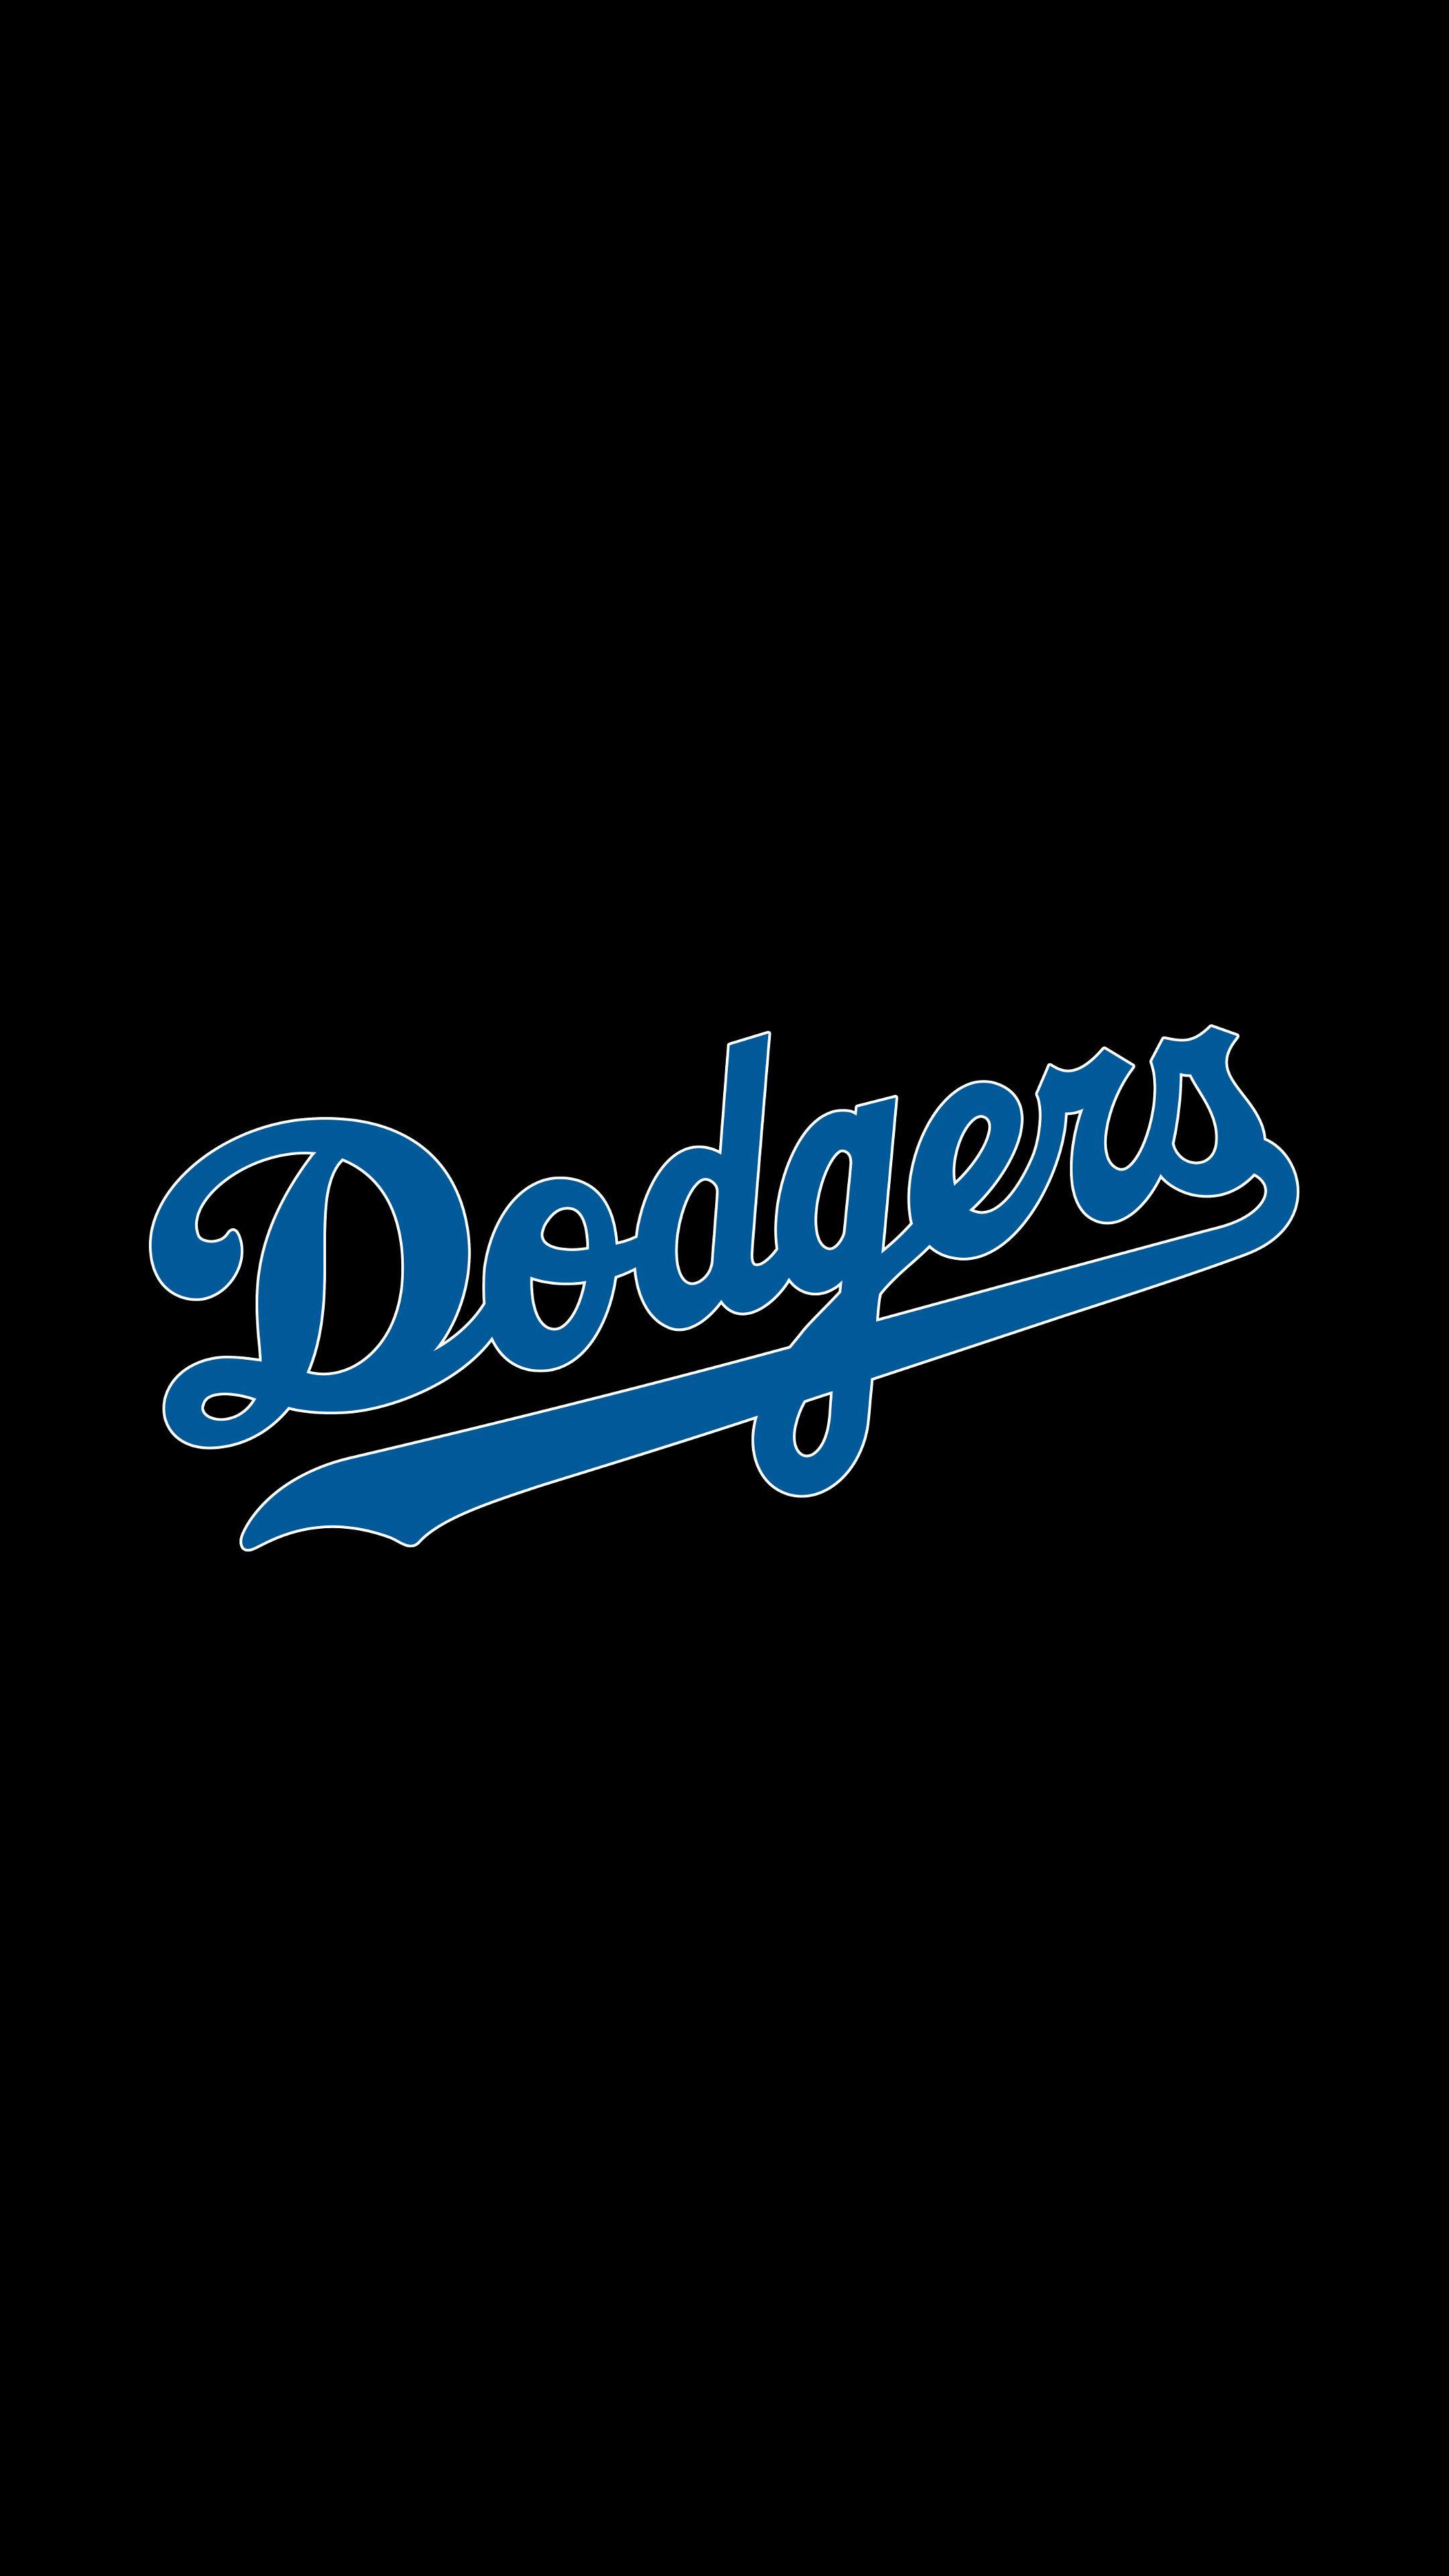 Download wallpapers Los Angeles Dodgers flag MLB blue white metal  background american baseball team Los Angeles Dodgers logo USA  baseball Los Dodgers Angels golden logo LA Dodgers for desktop free  Pictures for